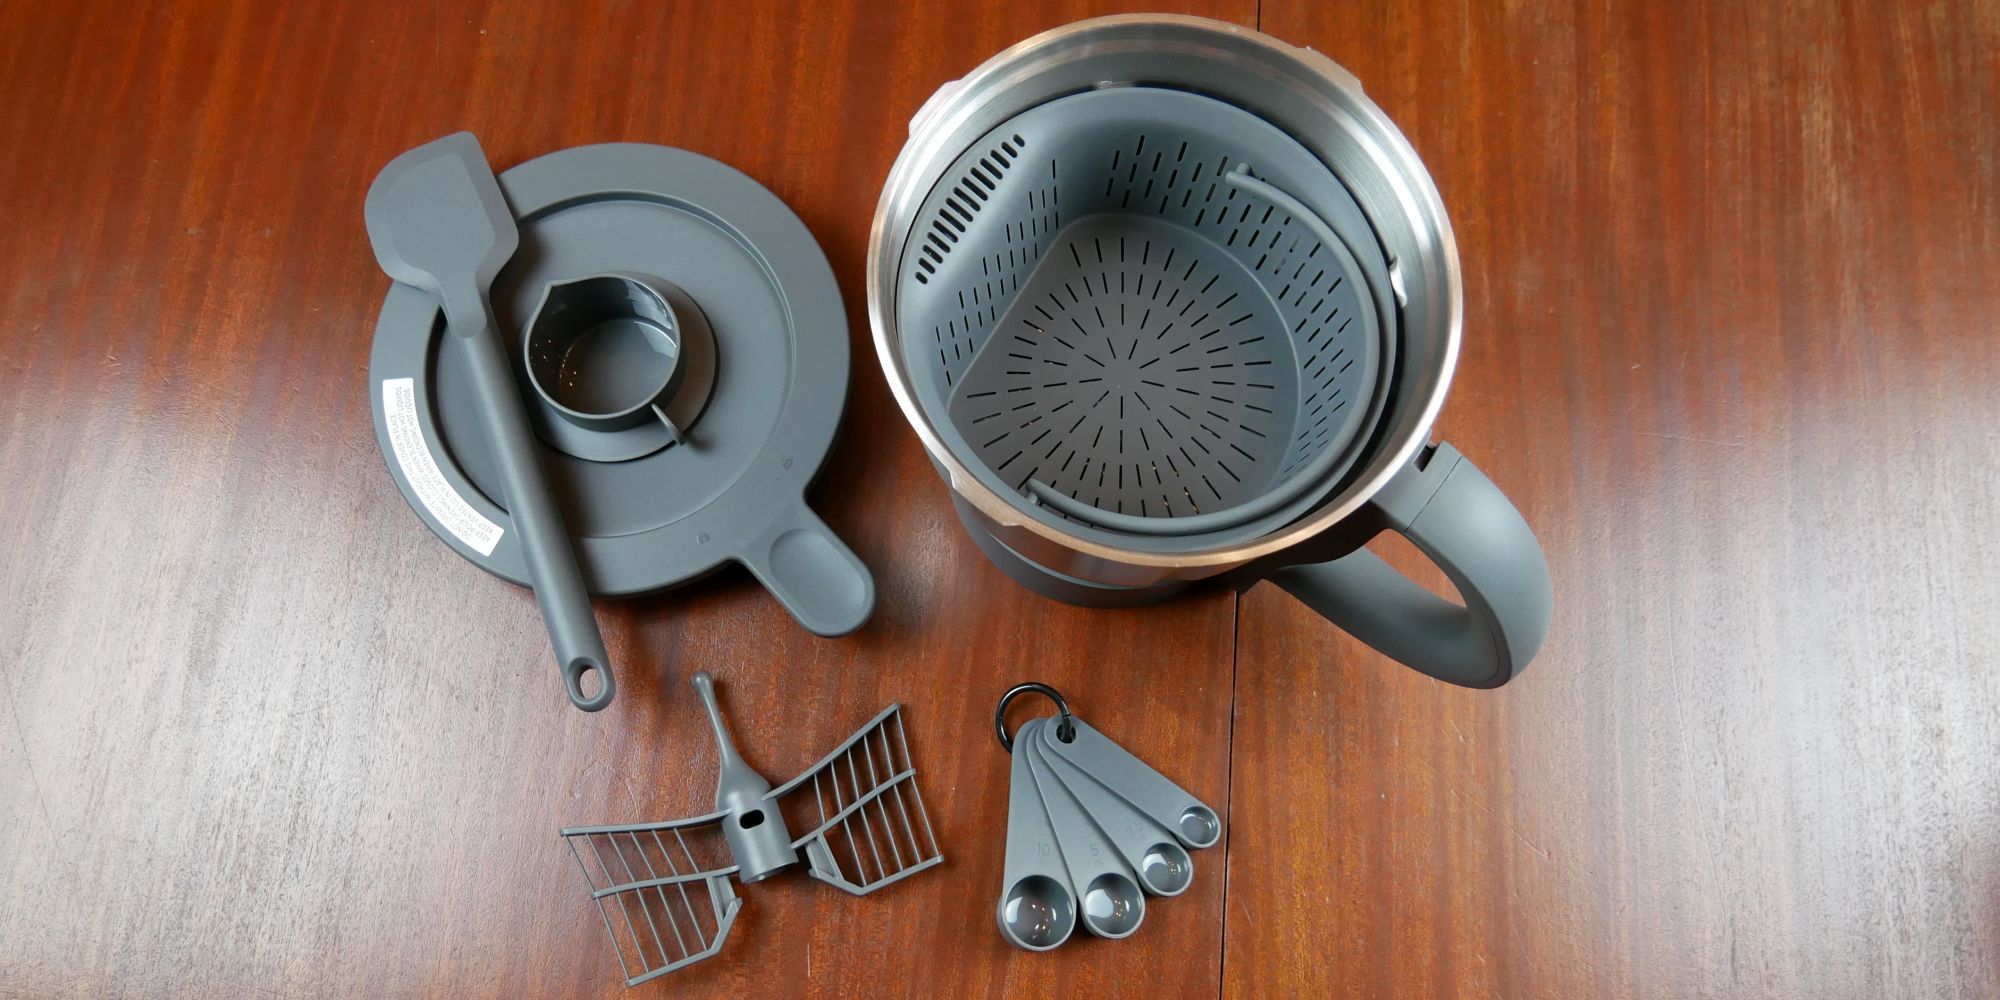 TOKIT Omni Cook Accessories With Basket in Mixing Bowl